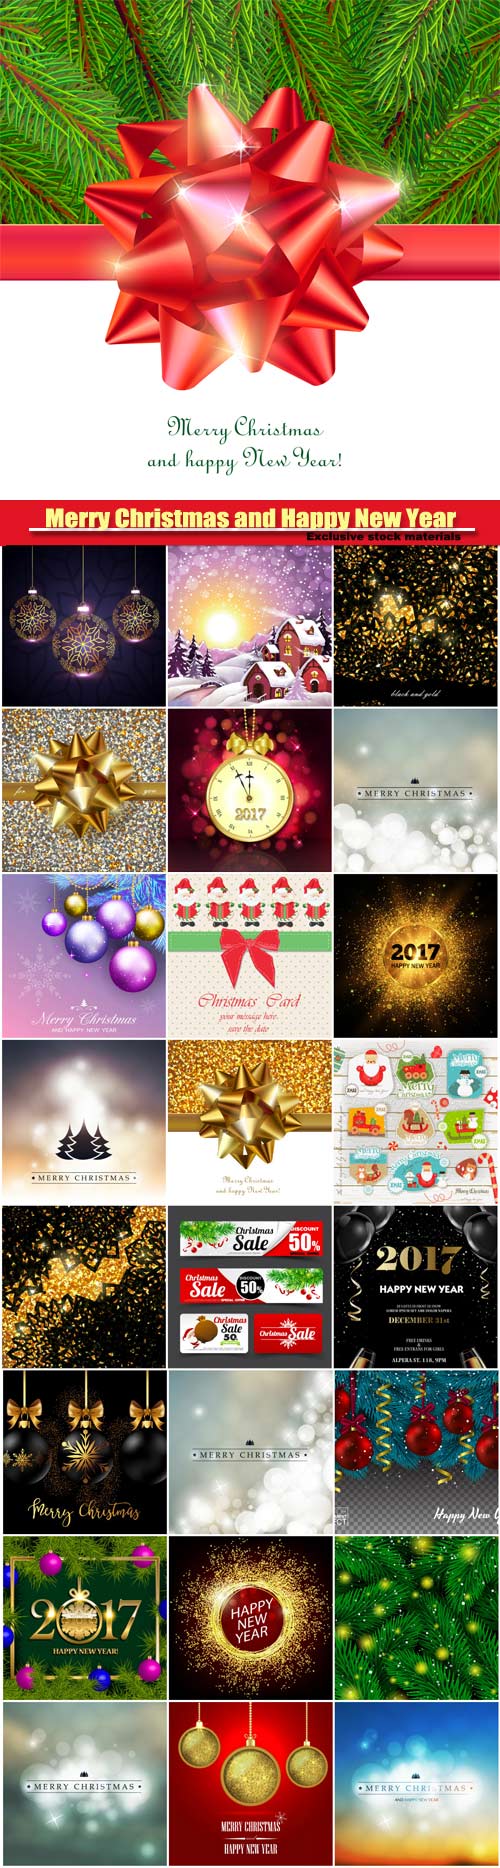 Merry Christmas and Happy New Year vector, festive background for greeting  ...